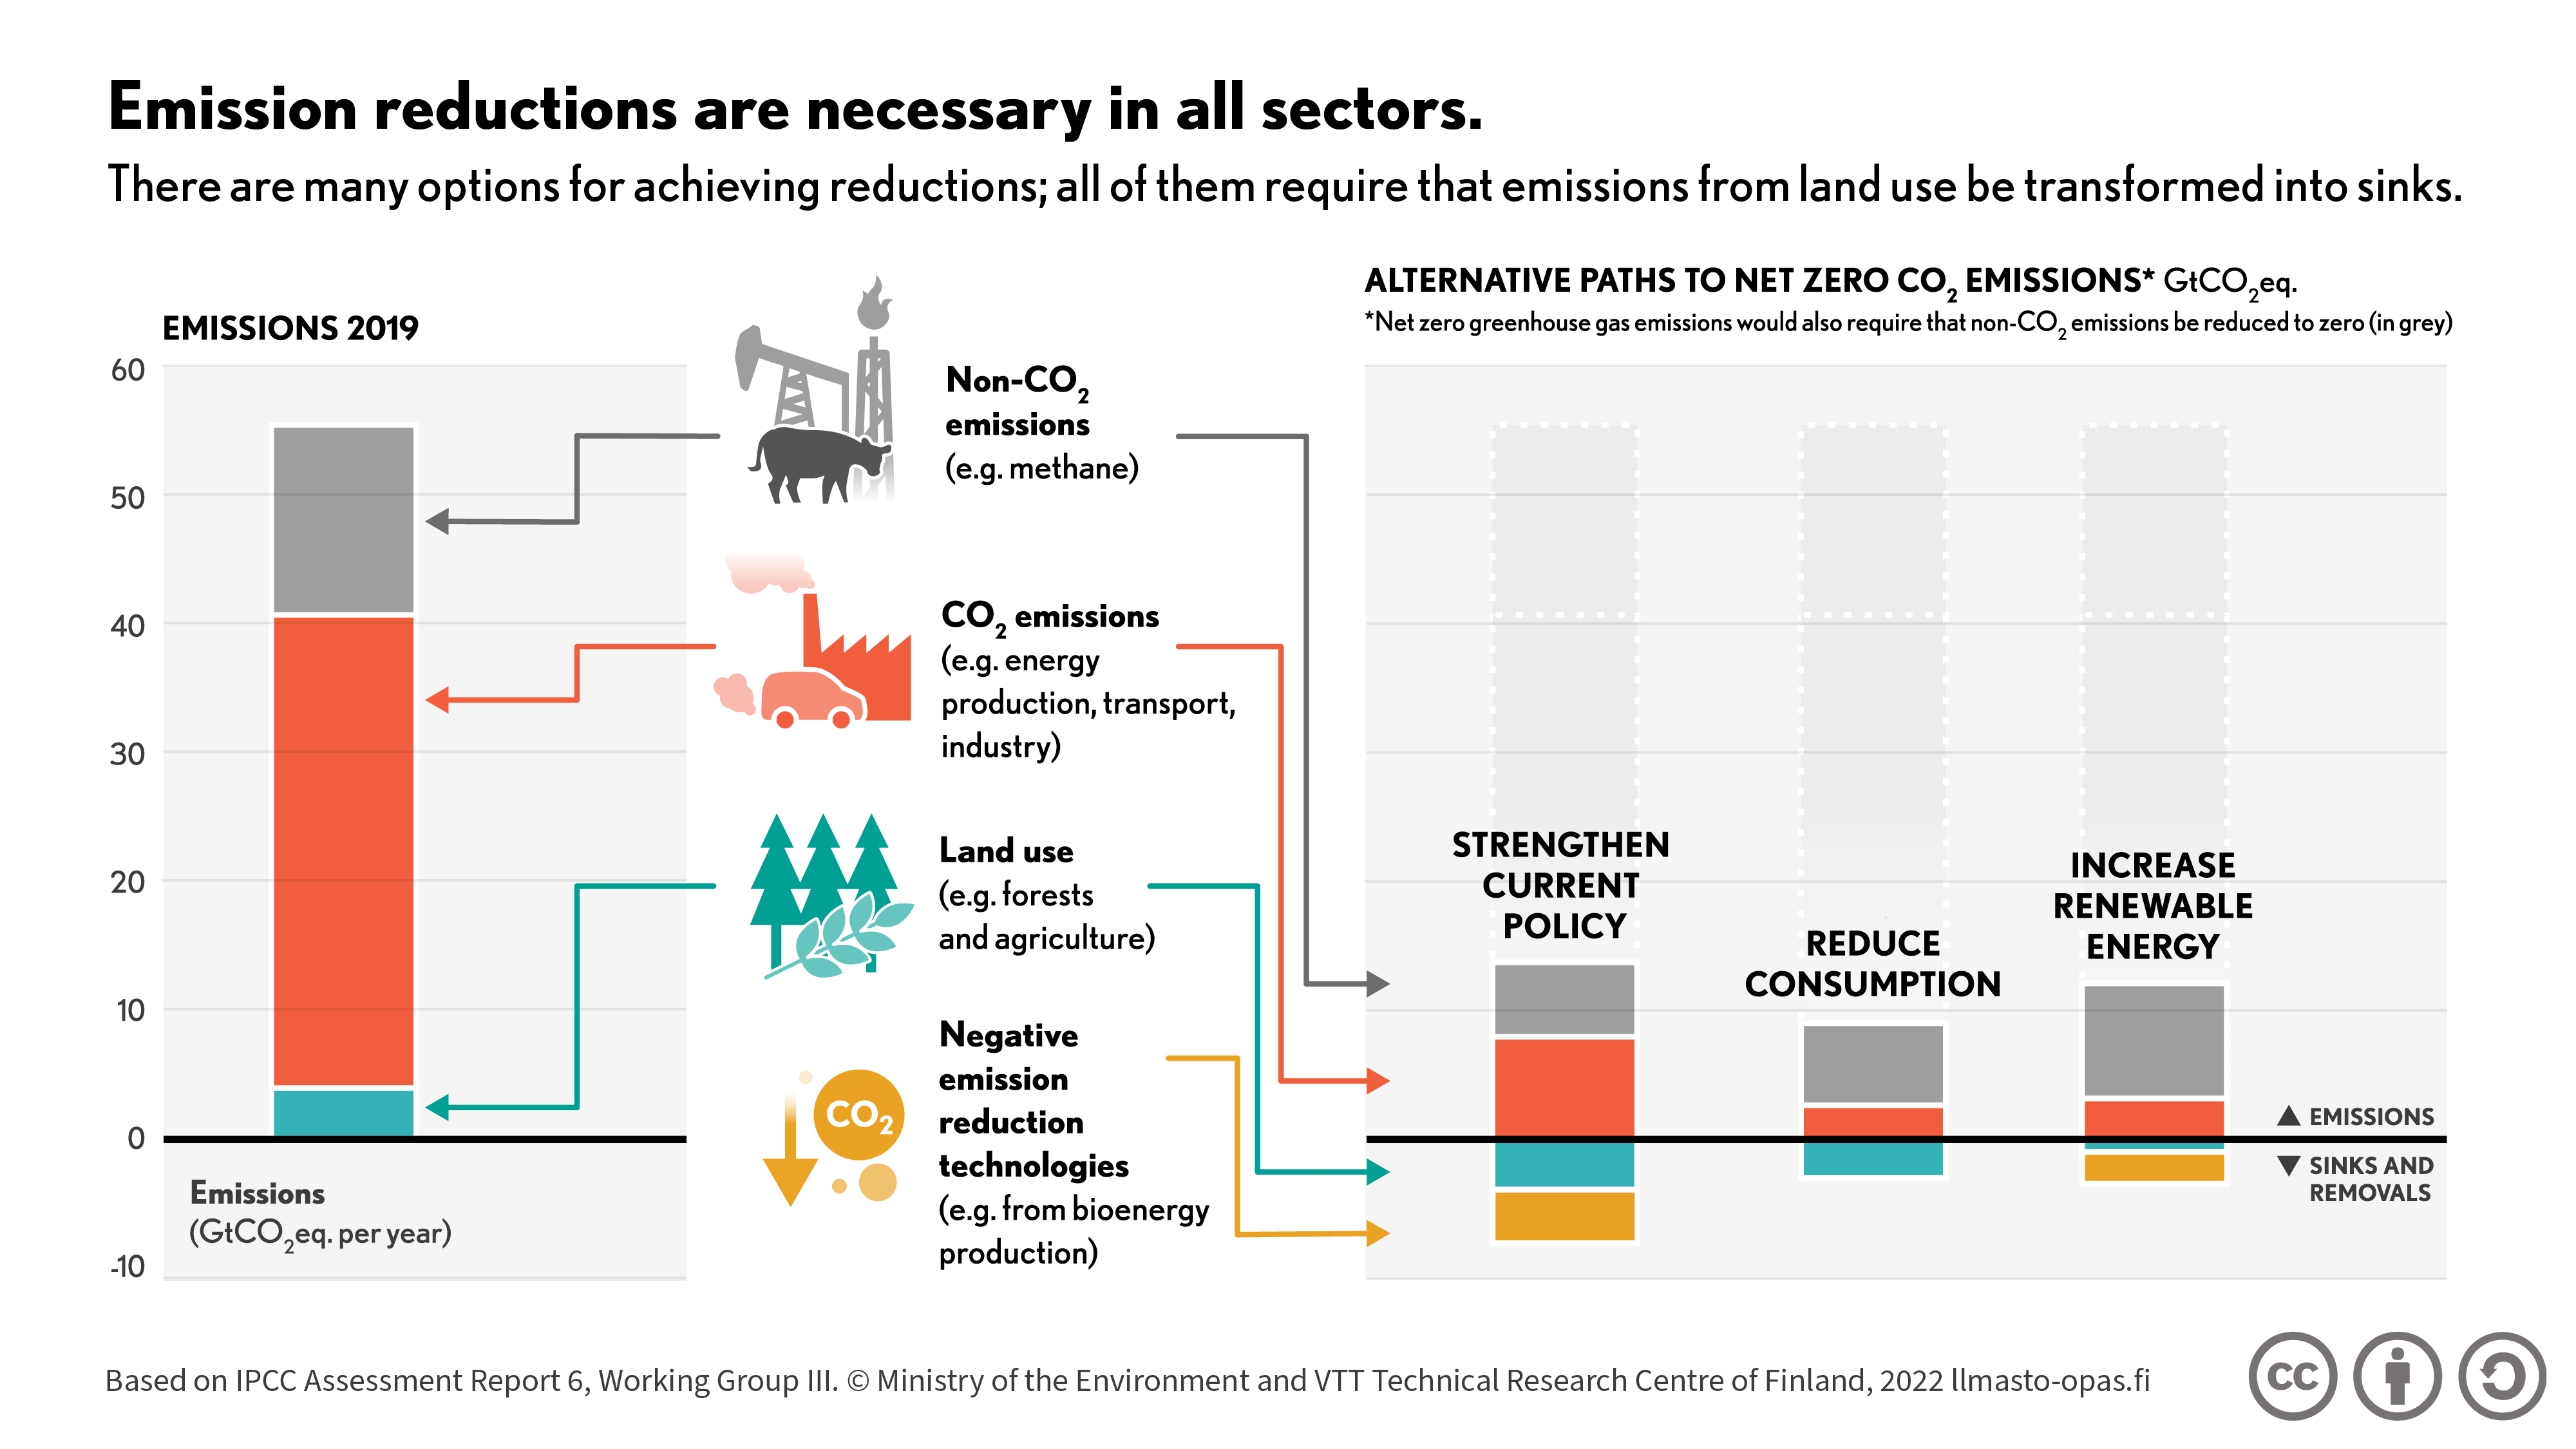 Showing the necessary emission reductions from 2019 in different sectors: non-co2, co2, land use, negative emissions technologies and three different scenarios